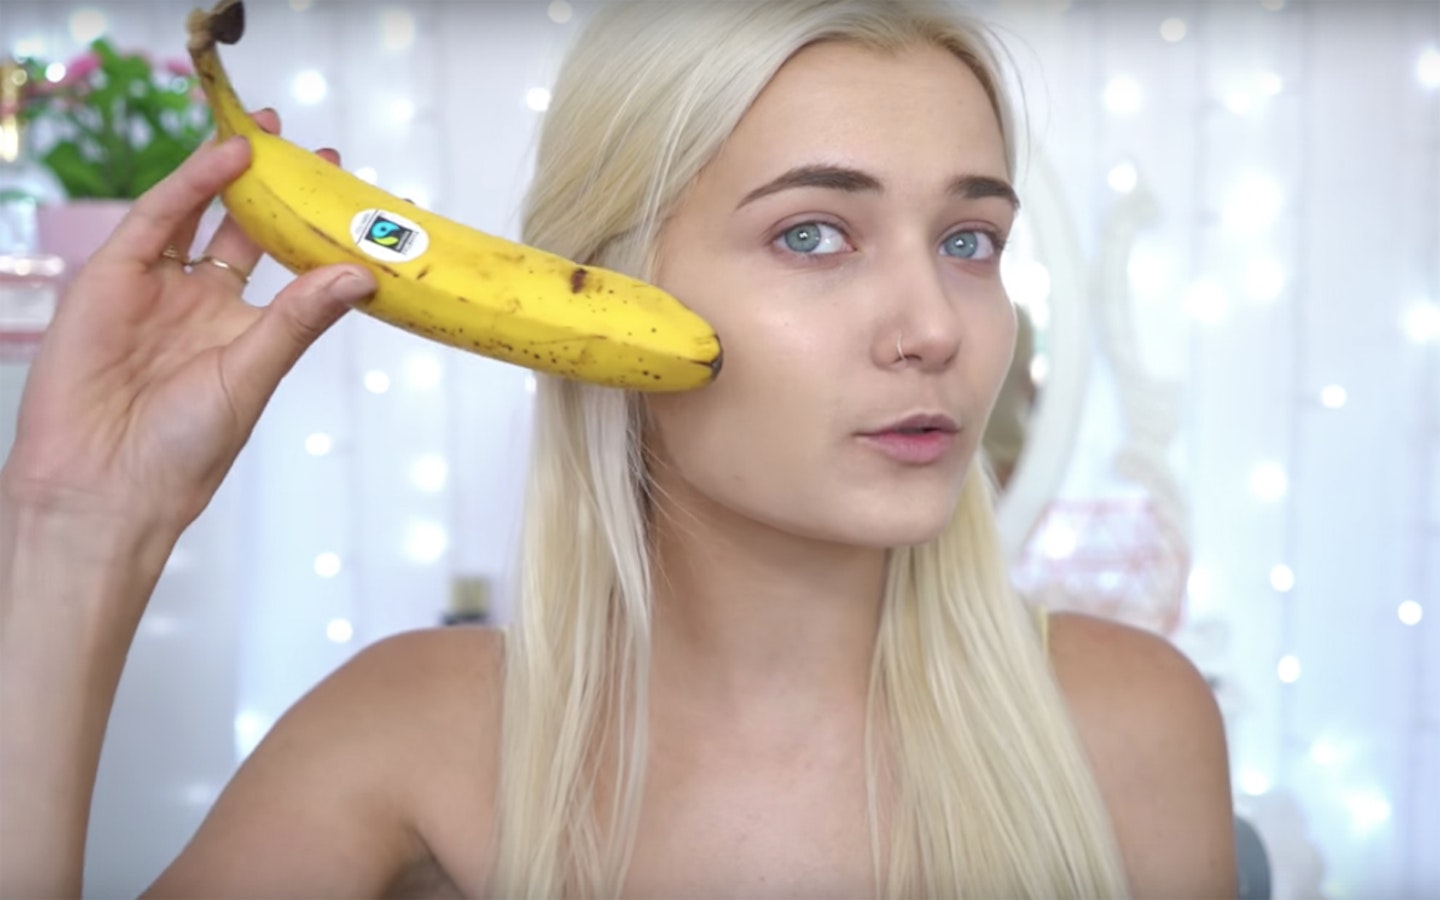 YouTubers using food to apply makeup